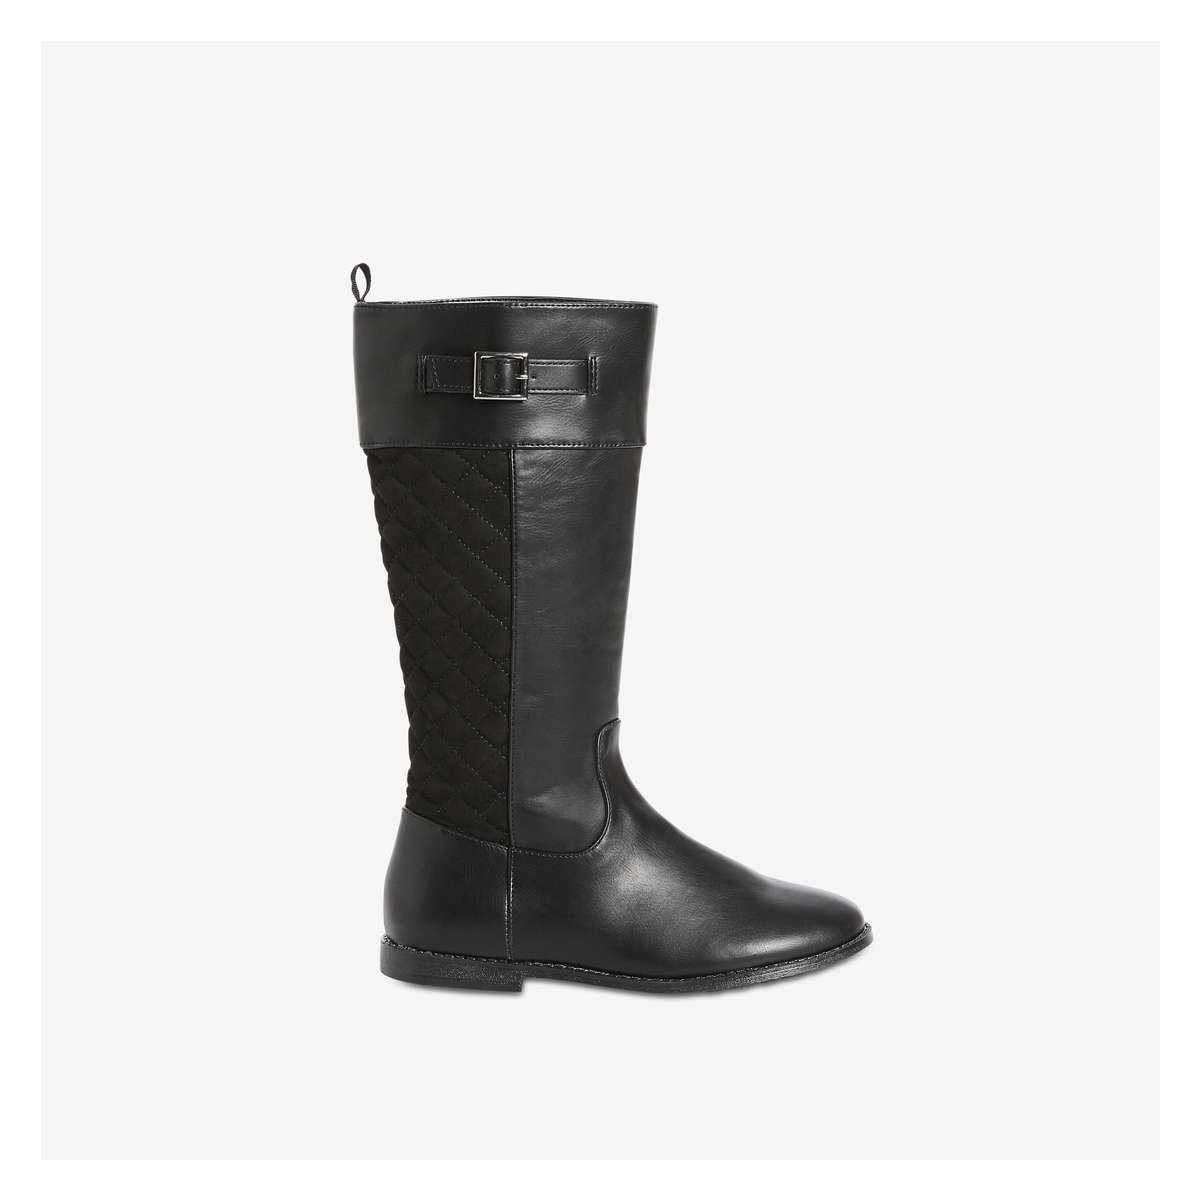 Kid Girls' Riding Boots in Black from 